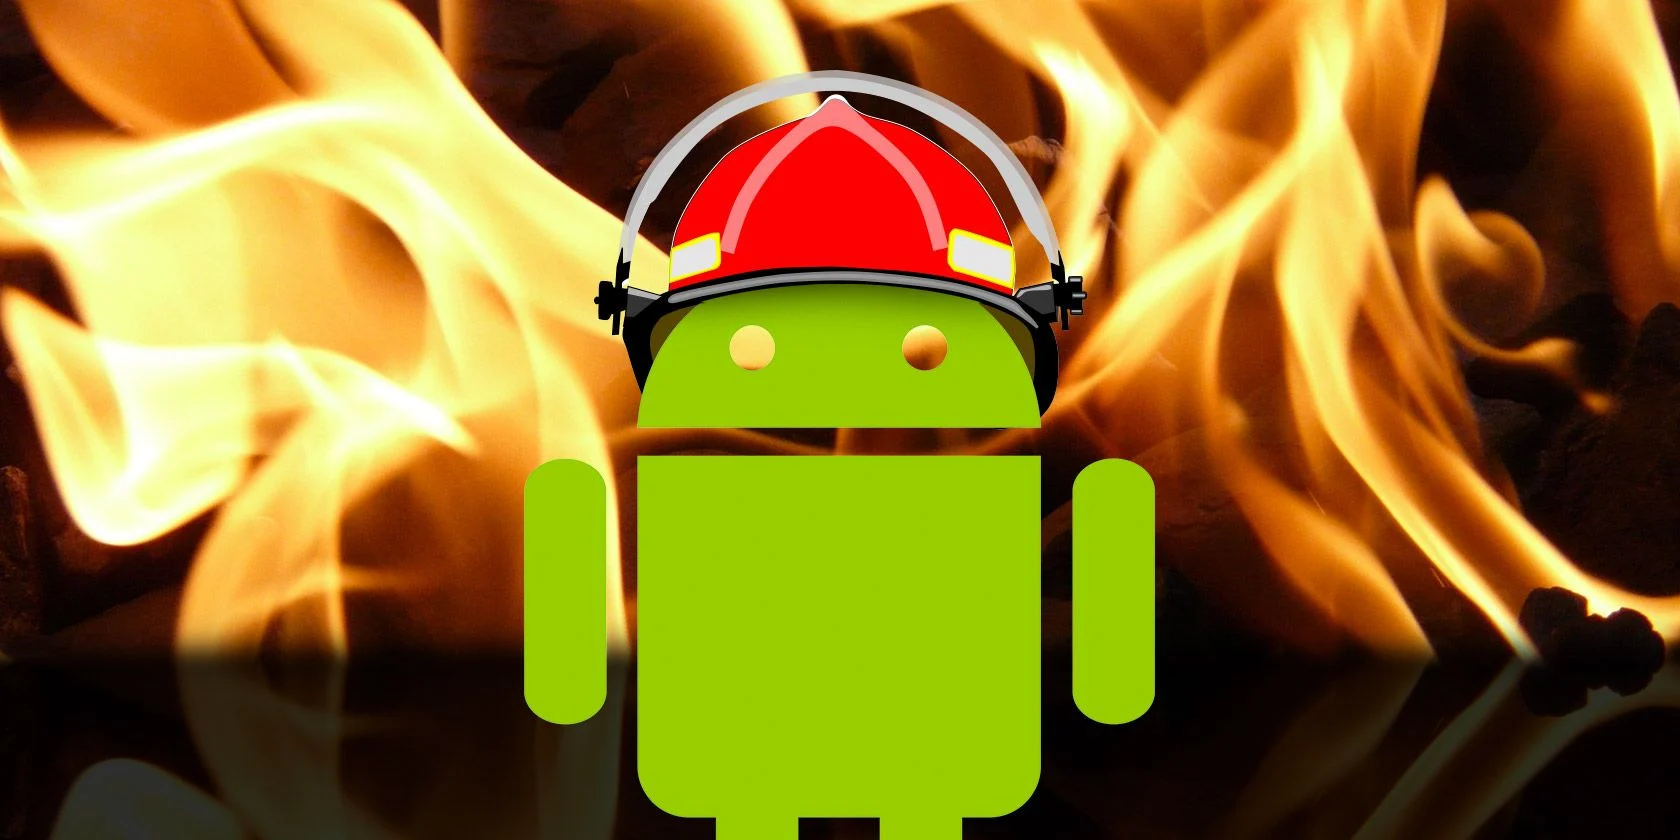 Android overheating (sumber: makeuseofimages.com)